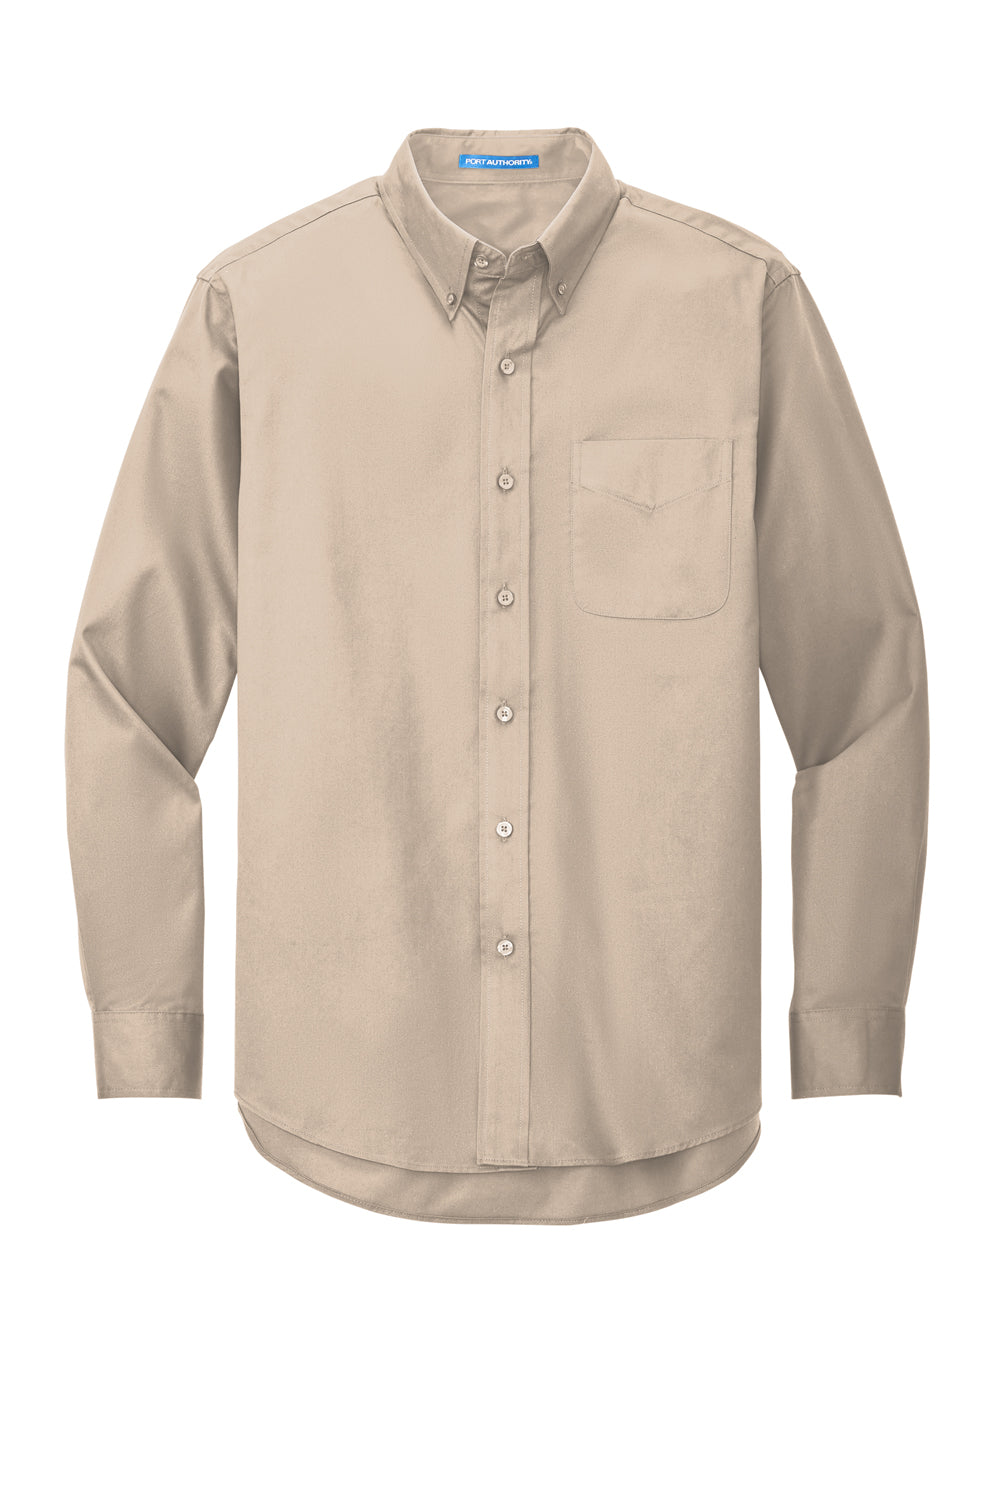 Port Authority S608/TLS608/S608ES Mens Easy Care Wrinkle Resistant Long Sleeve Button Down Shirt w/ Pocket Stone Flat Front